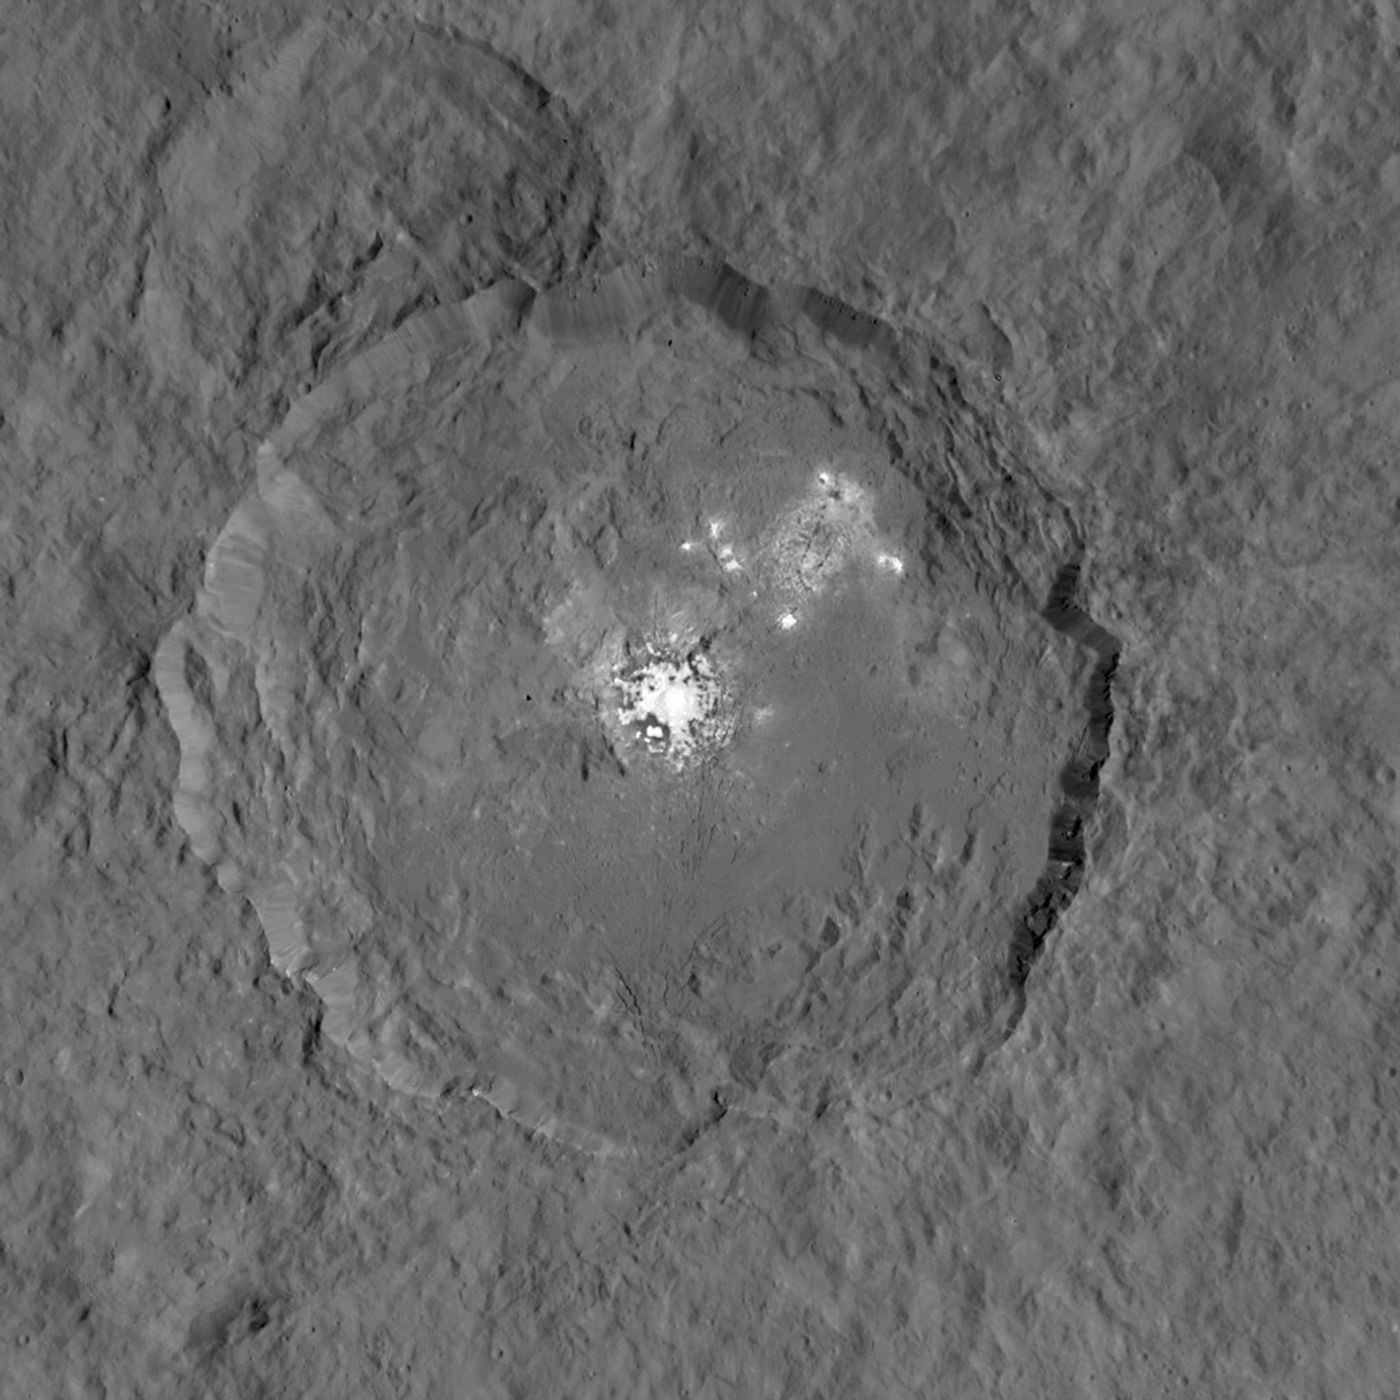 NASA's Dawn spacecraft has snapped high-resolution images of the bright spots on Ceres.